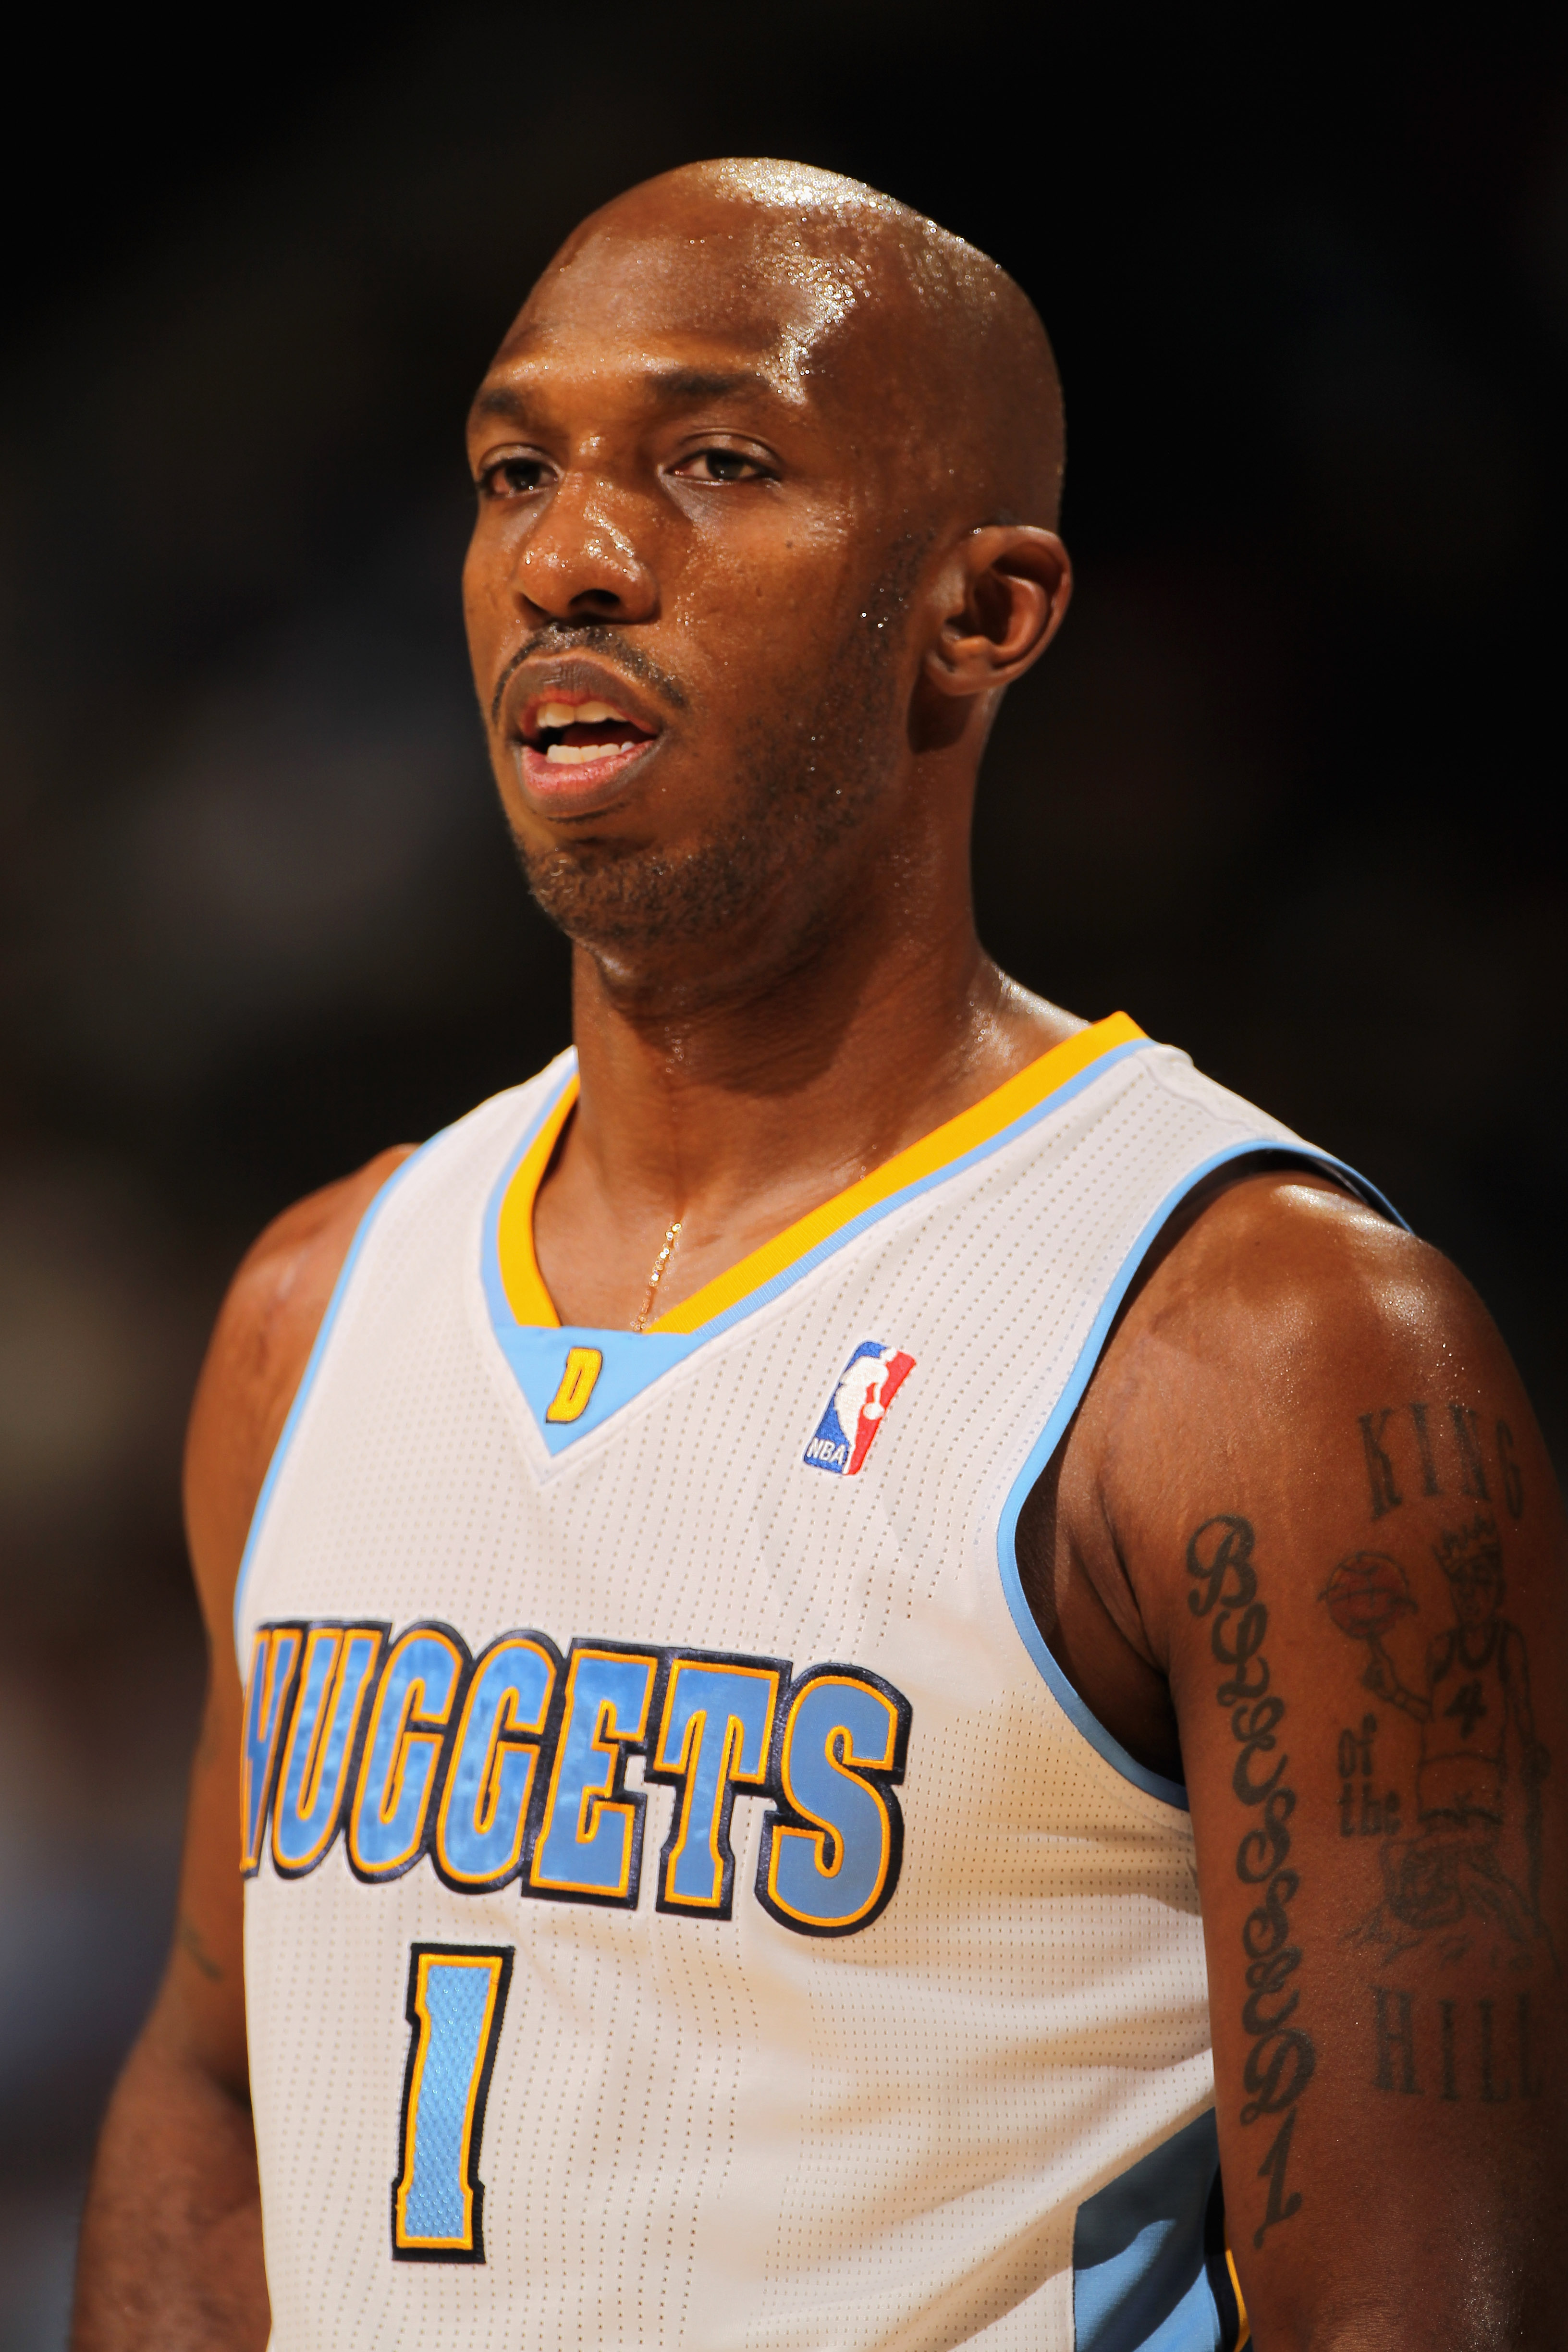 DENVER - NOVEMBER 16:  Chauncey Billups #1 of the Denver Nuggets looks on during a break in the action against the New York Knicks at the Pepsi Center on November 16, 2010 in Denver, Colorado. The Nuggets defeated the Knicks 120-118. NOTE TO USER: User ex